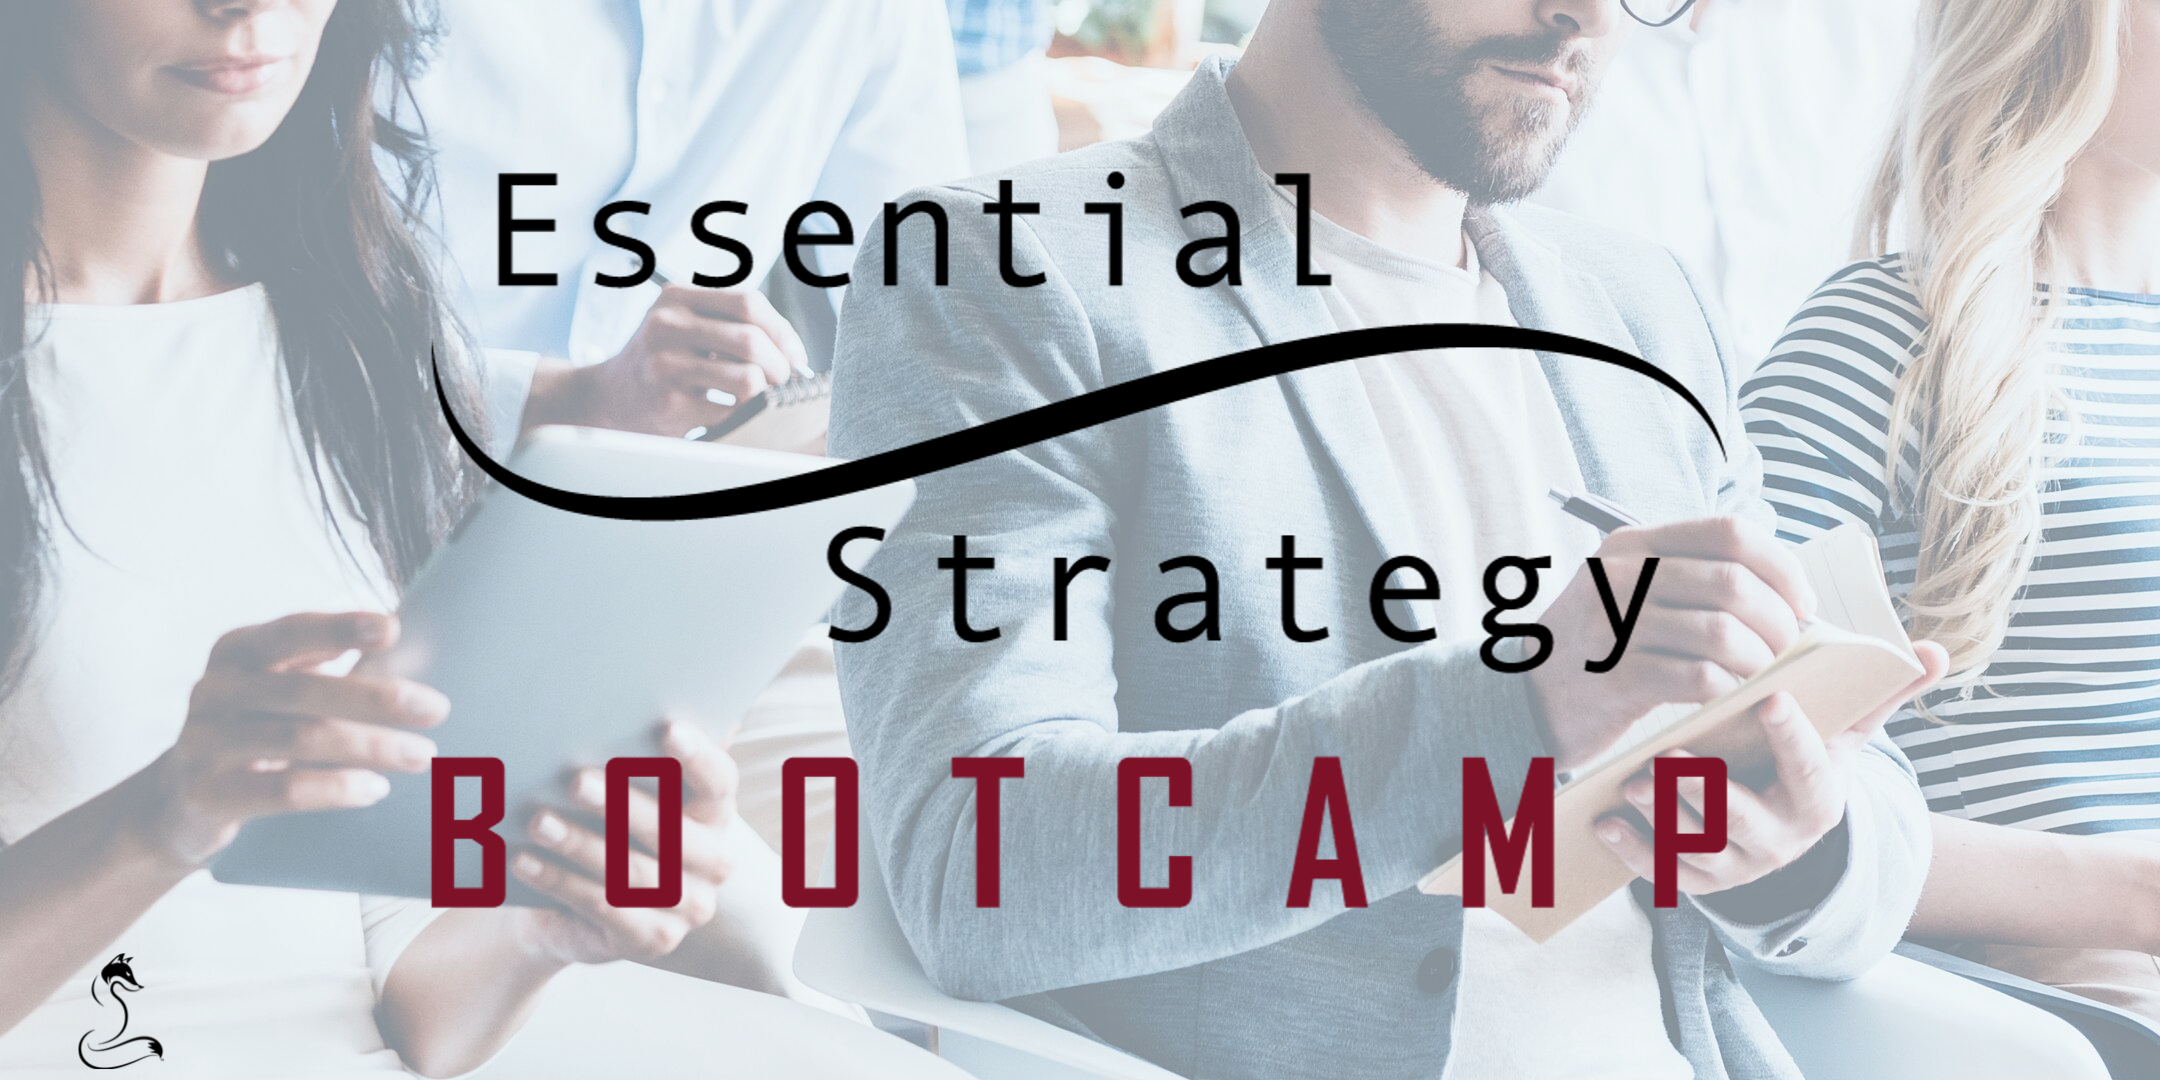 Essential Strategy Bootcamp Five-Course Bundle